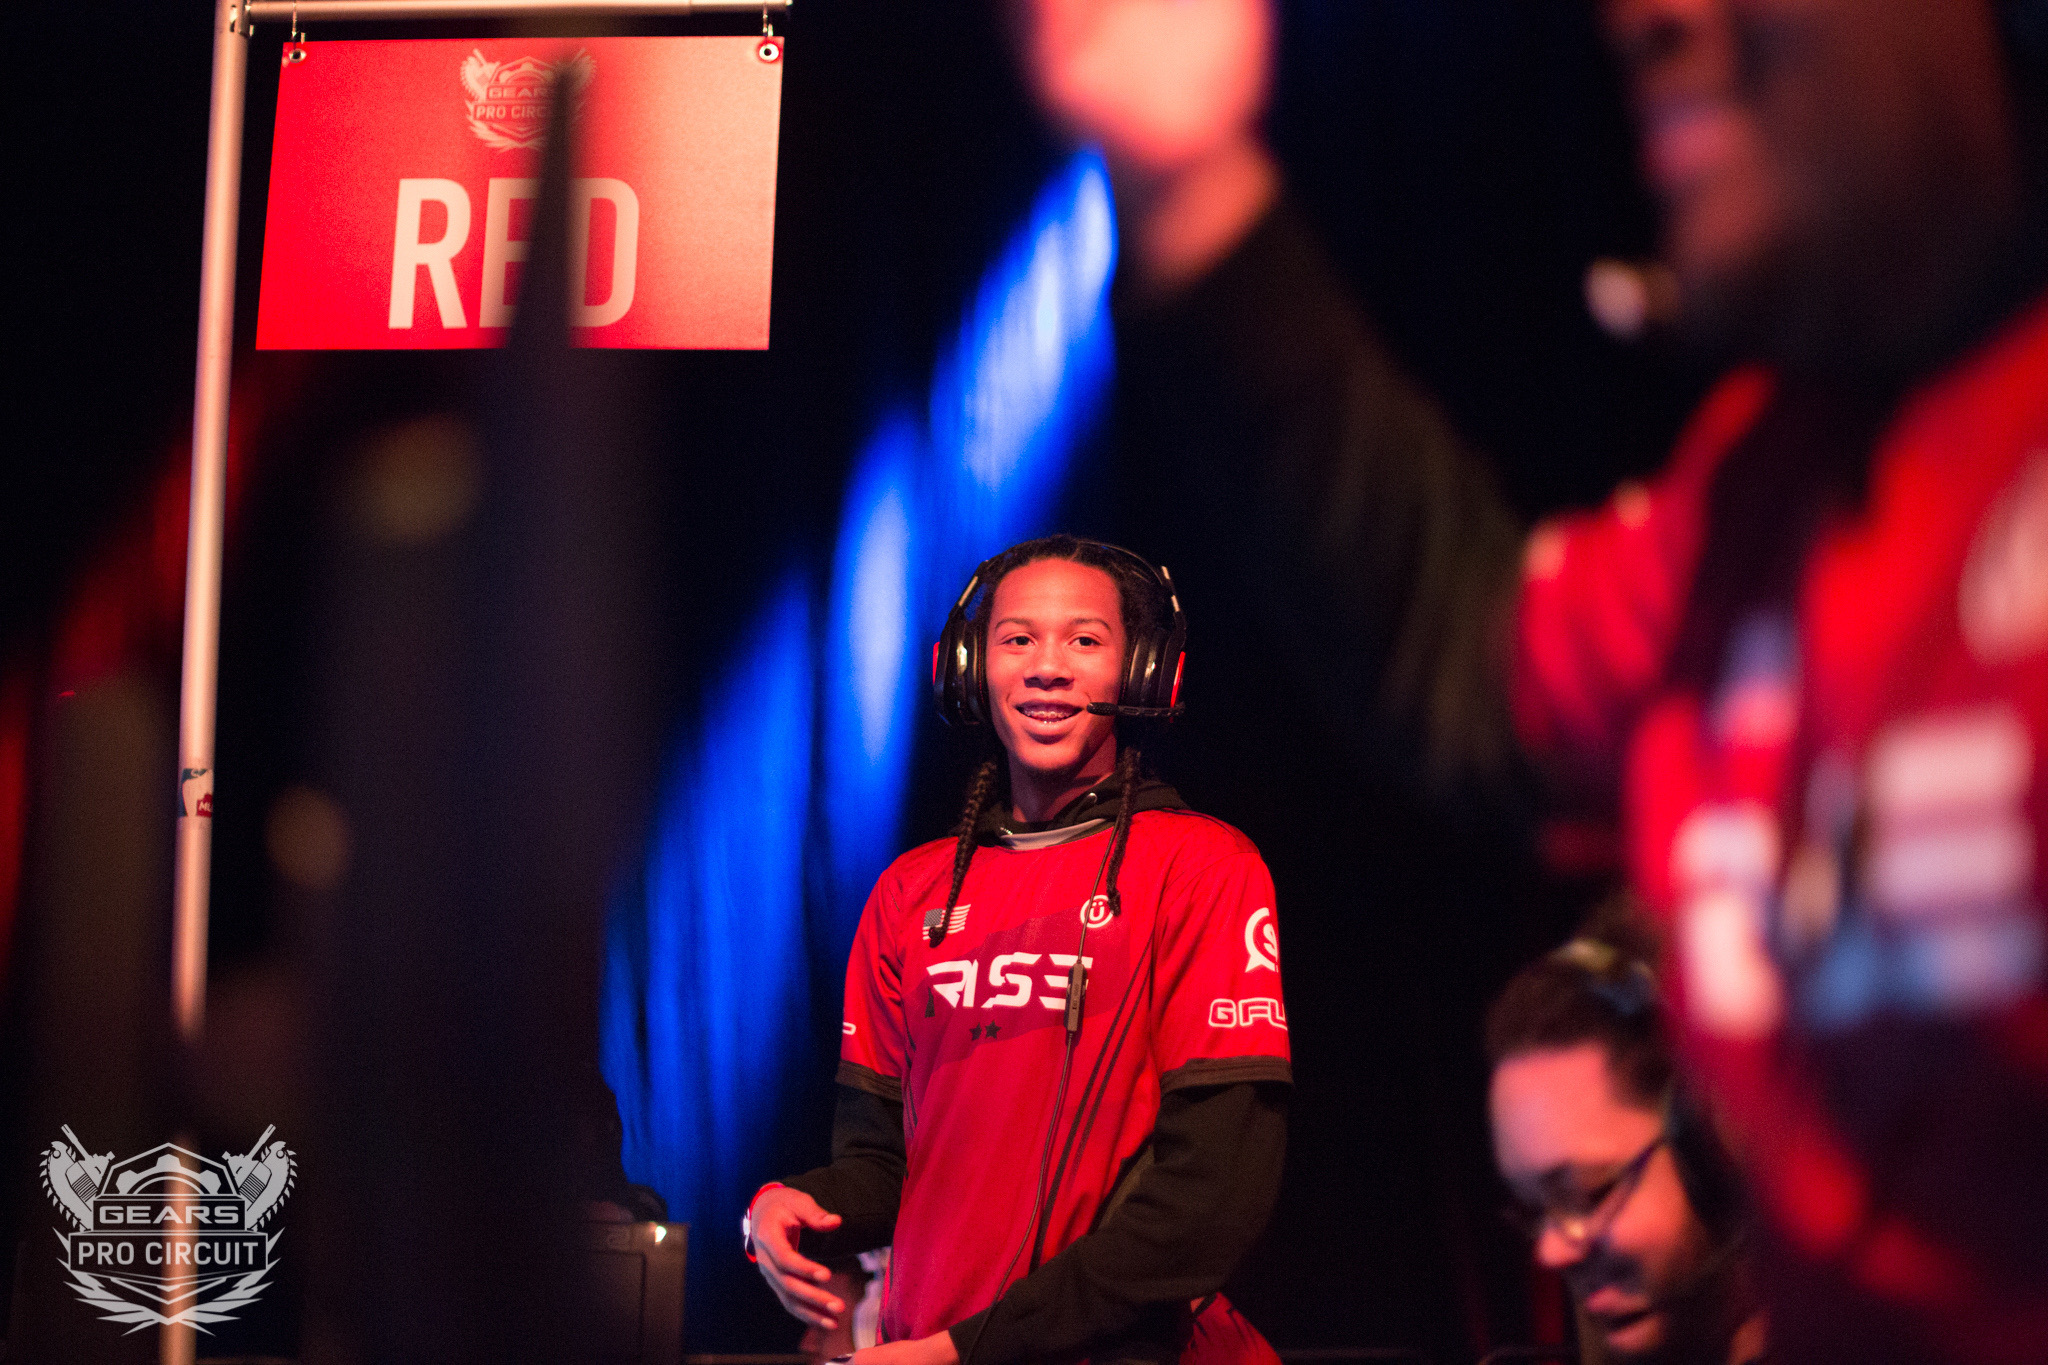 Meet Jvonn Williams, A 22-Year-Old Black Gamer Who Went Pro In 'Gears Of War' And Aims For 'Apex Legends' Next